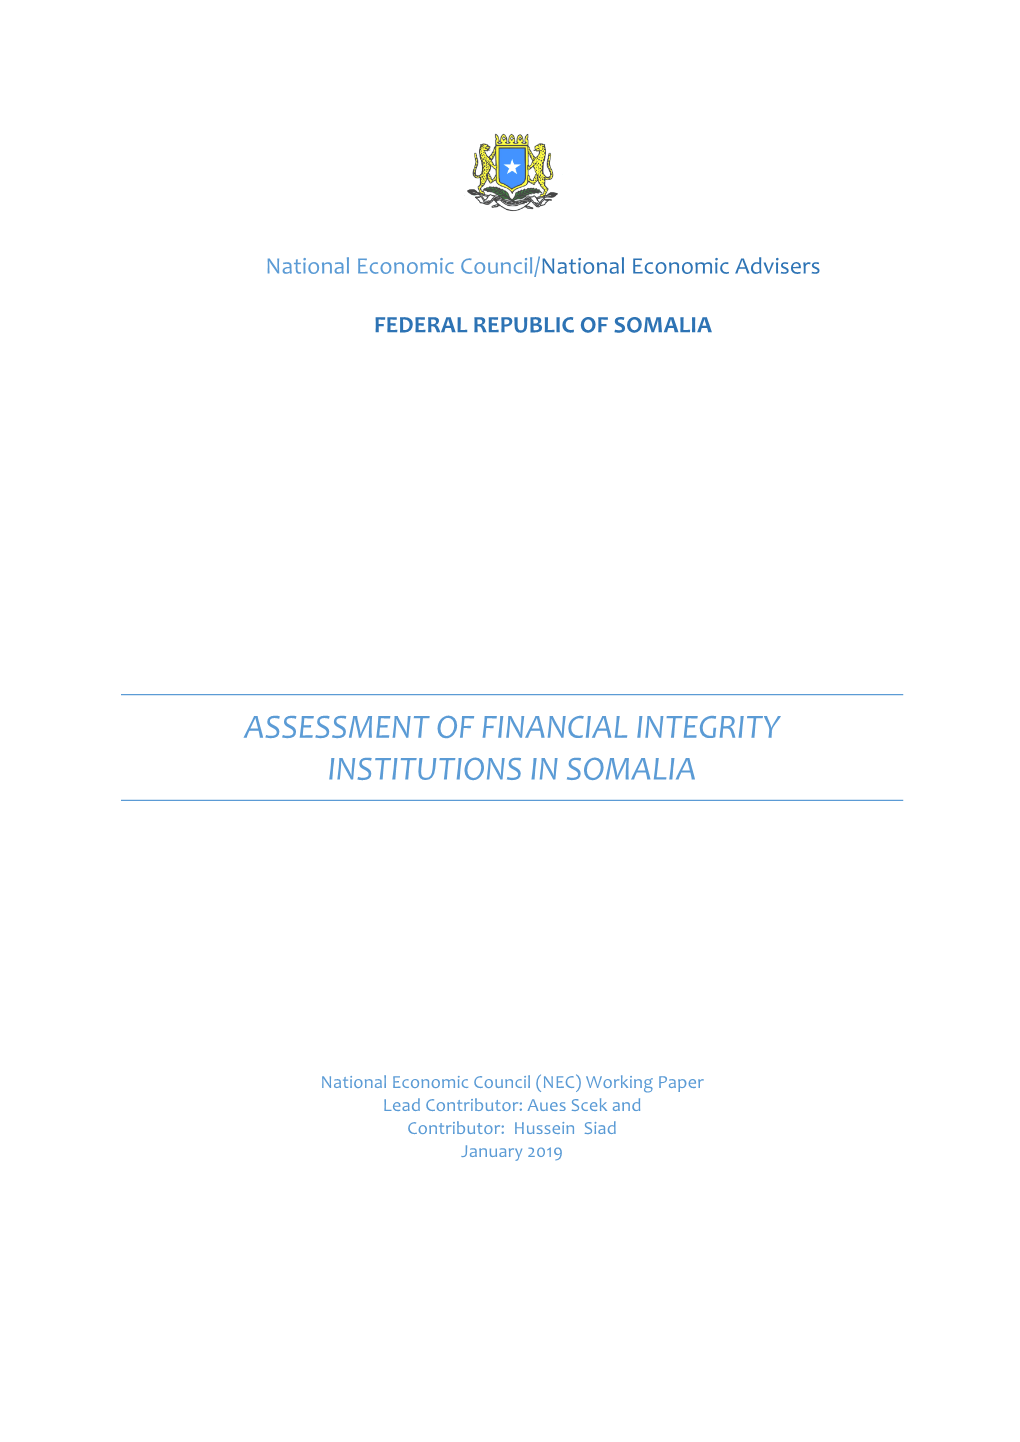 Assessment of Financial Integrity Institutions in Somalia